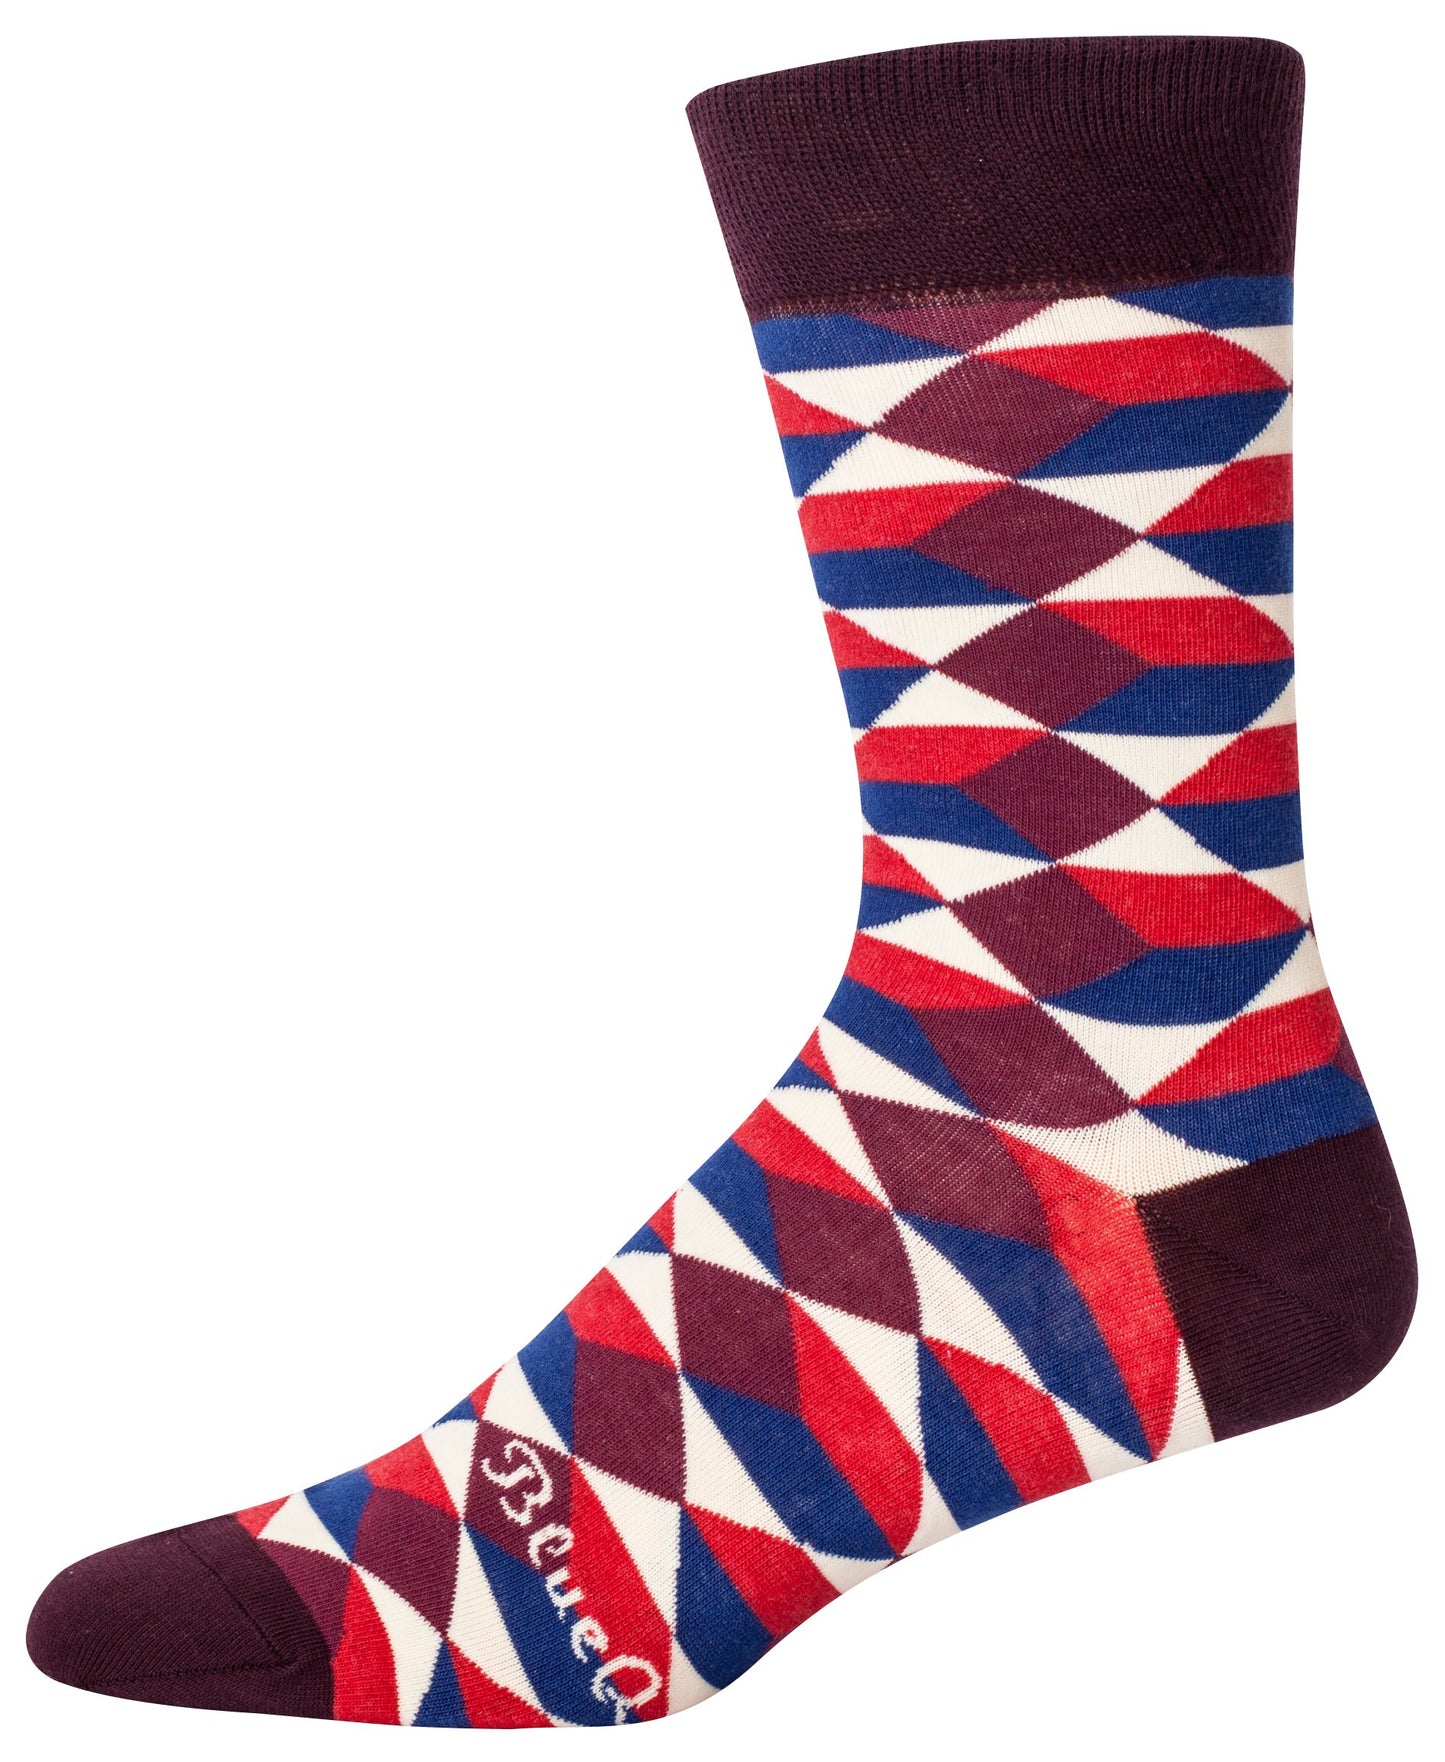 Blue Q - Men's Crew Socks - Busy Making a Fxxking Difference